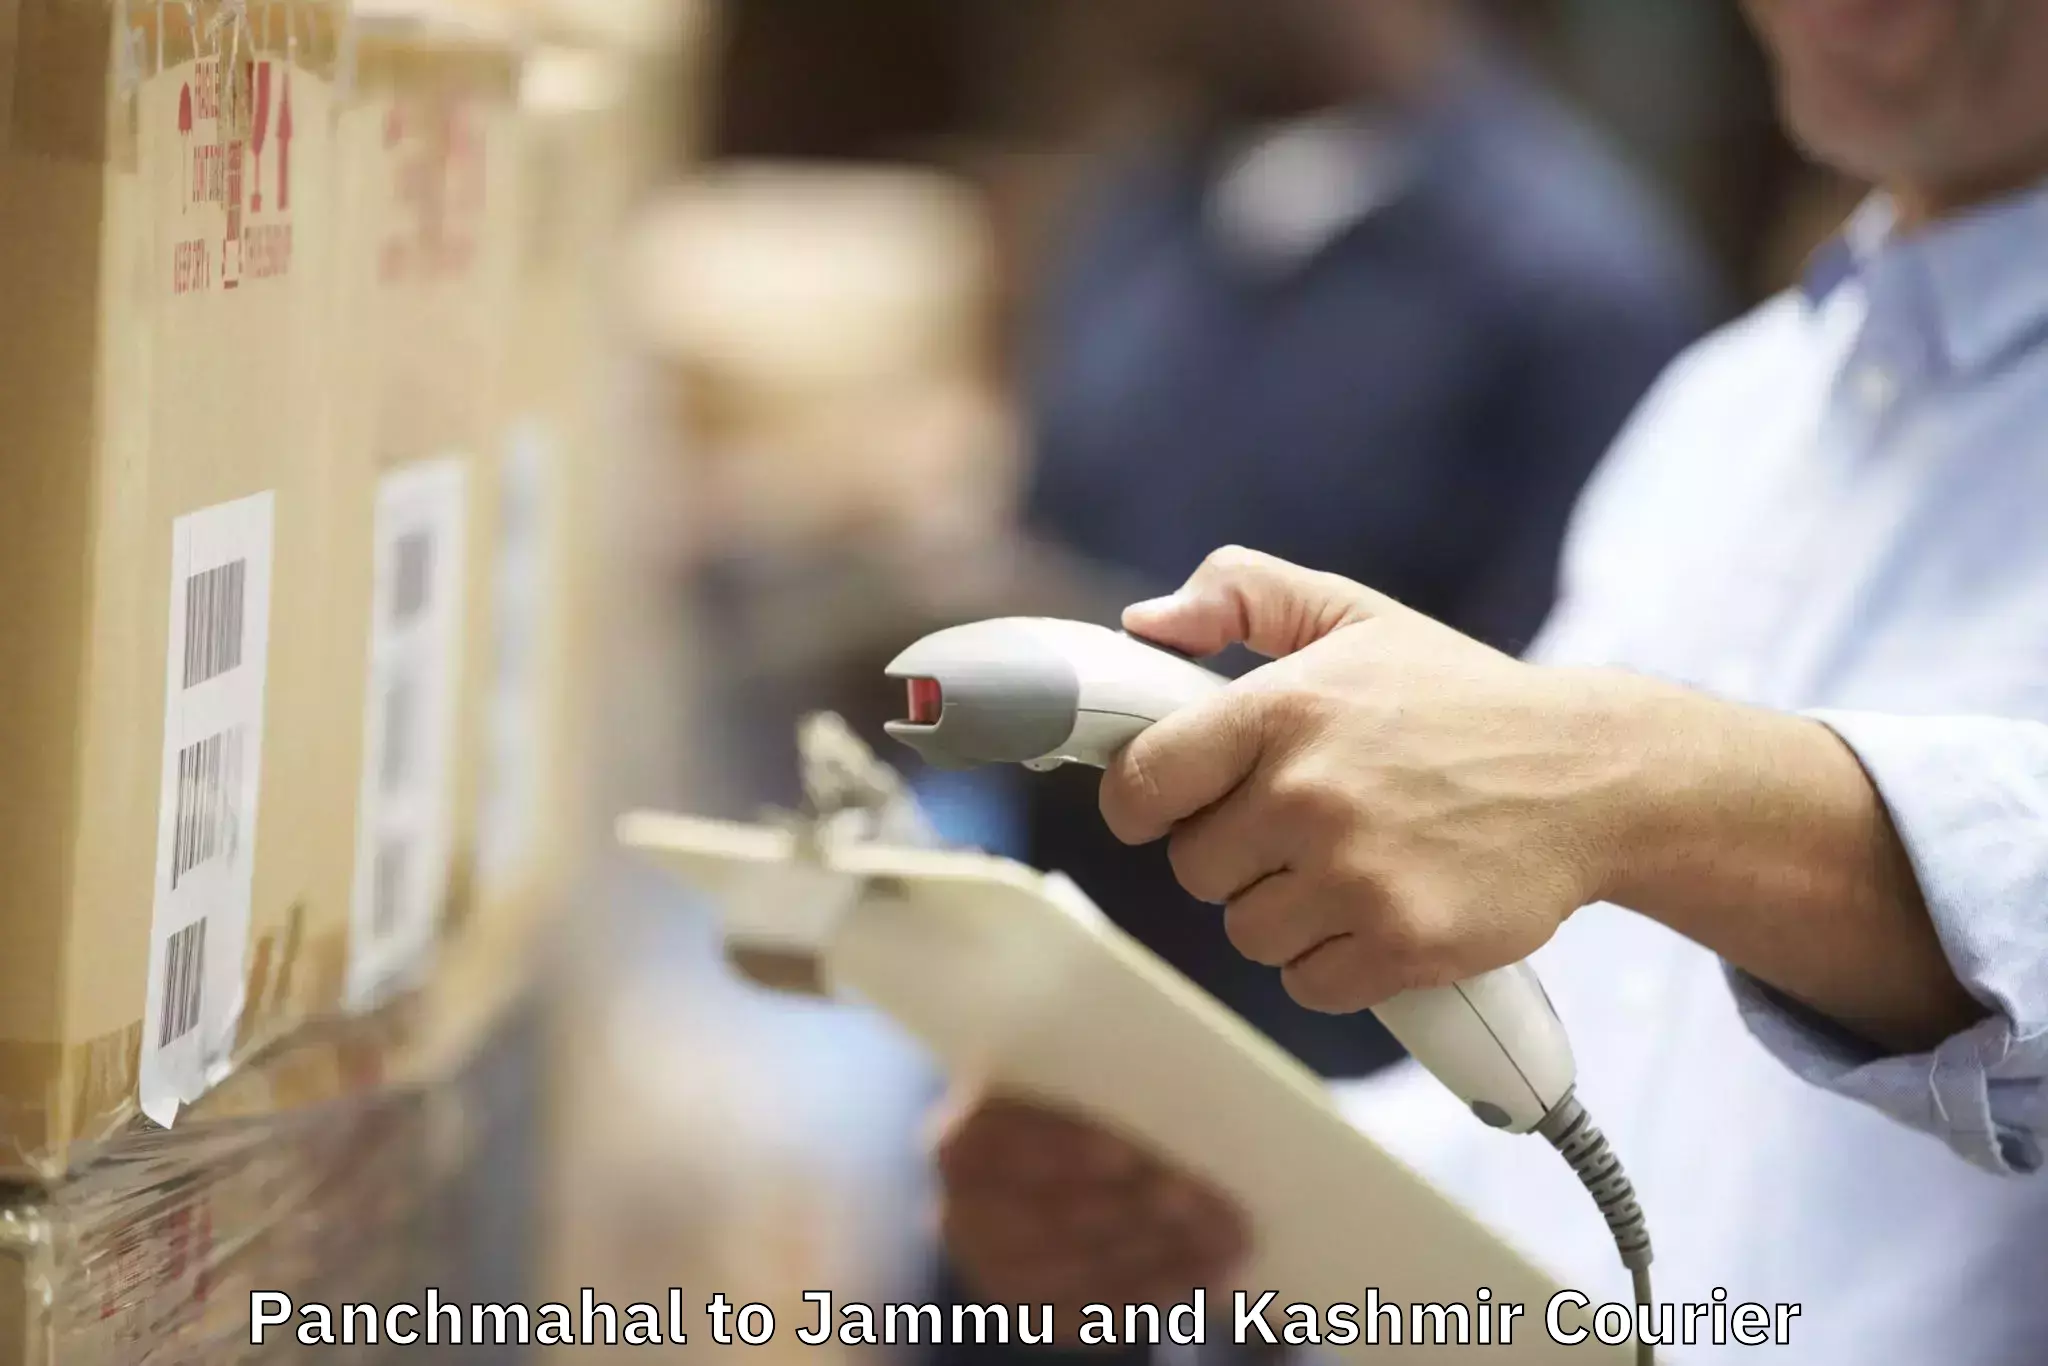 Furniture relocation experts Panchmahal to University of Jammu